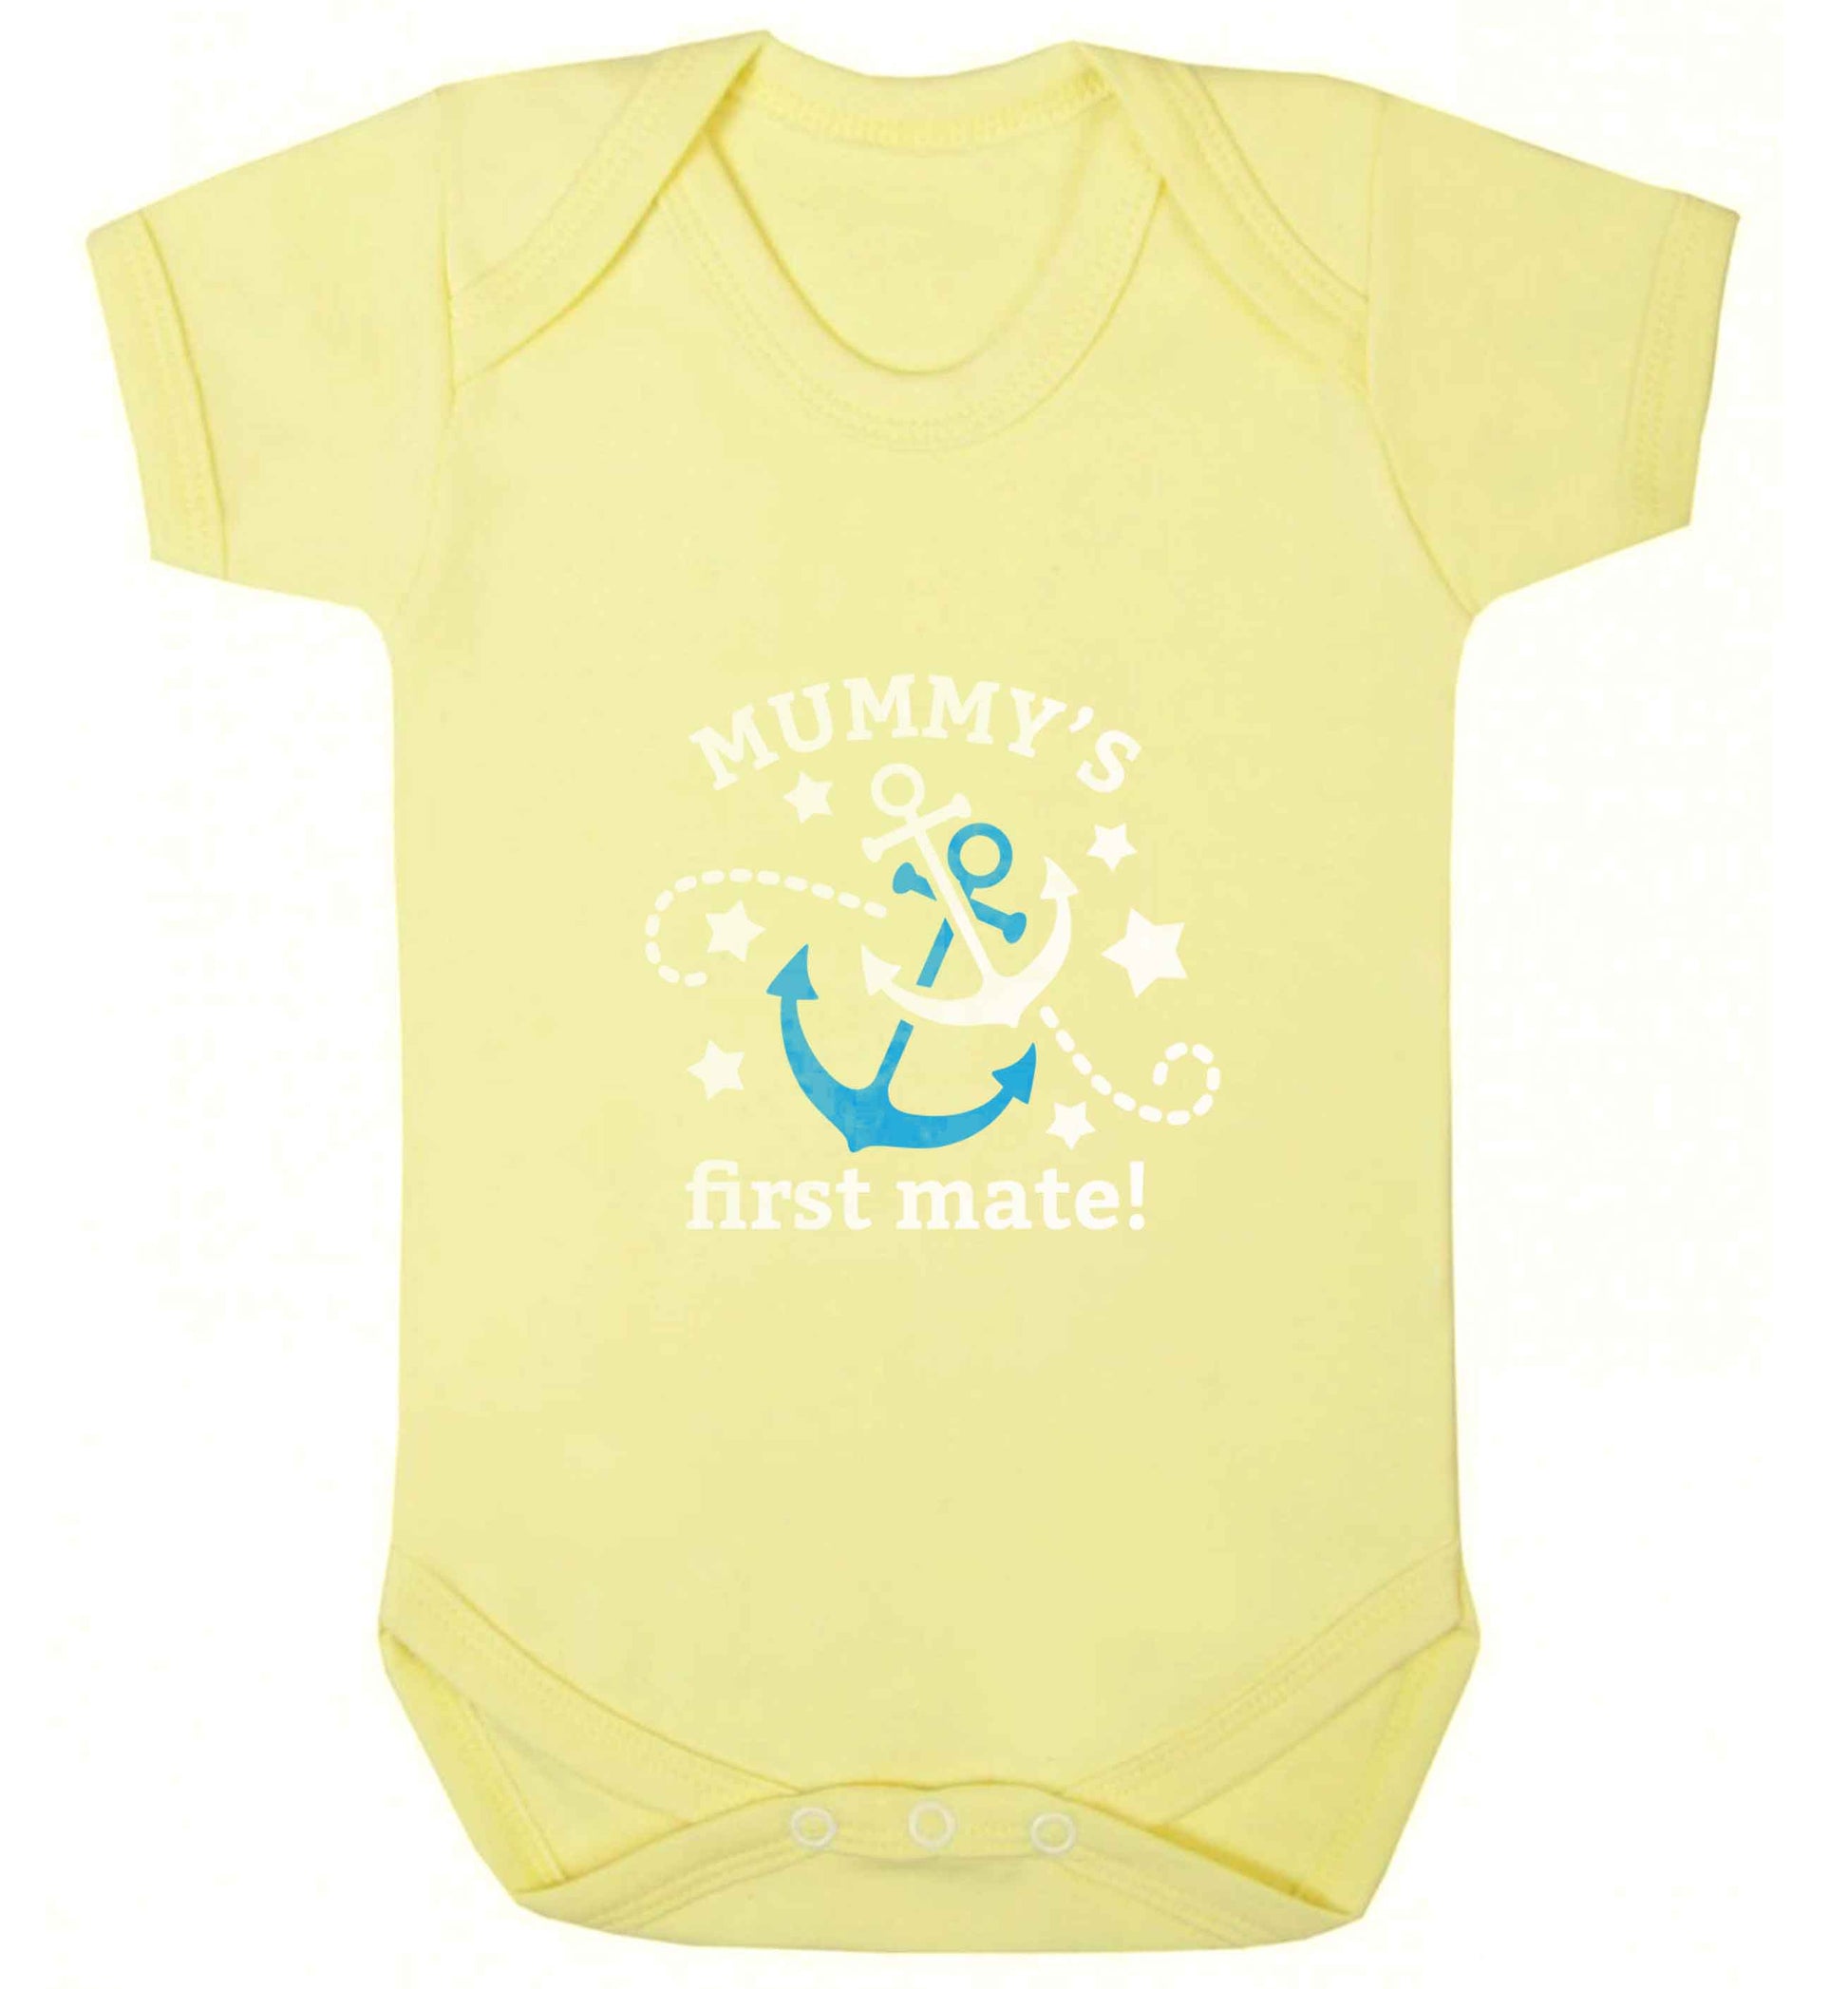 Mummy's First Mate baby vest pale yellow 18-24 months